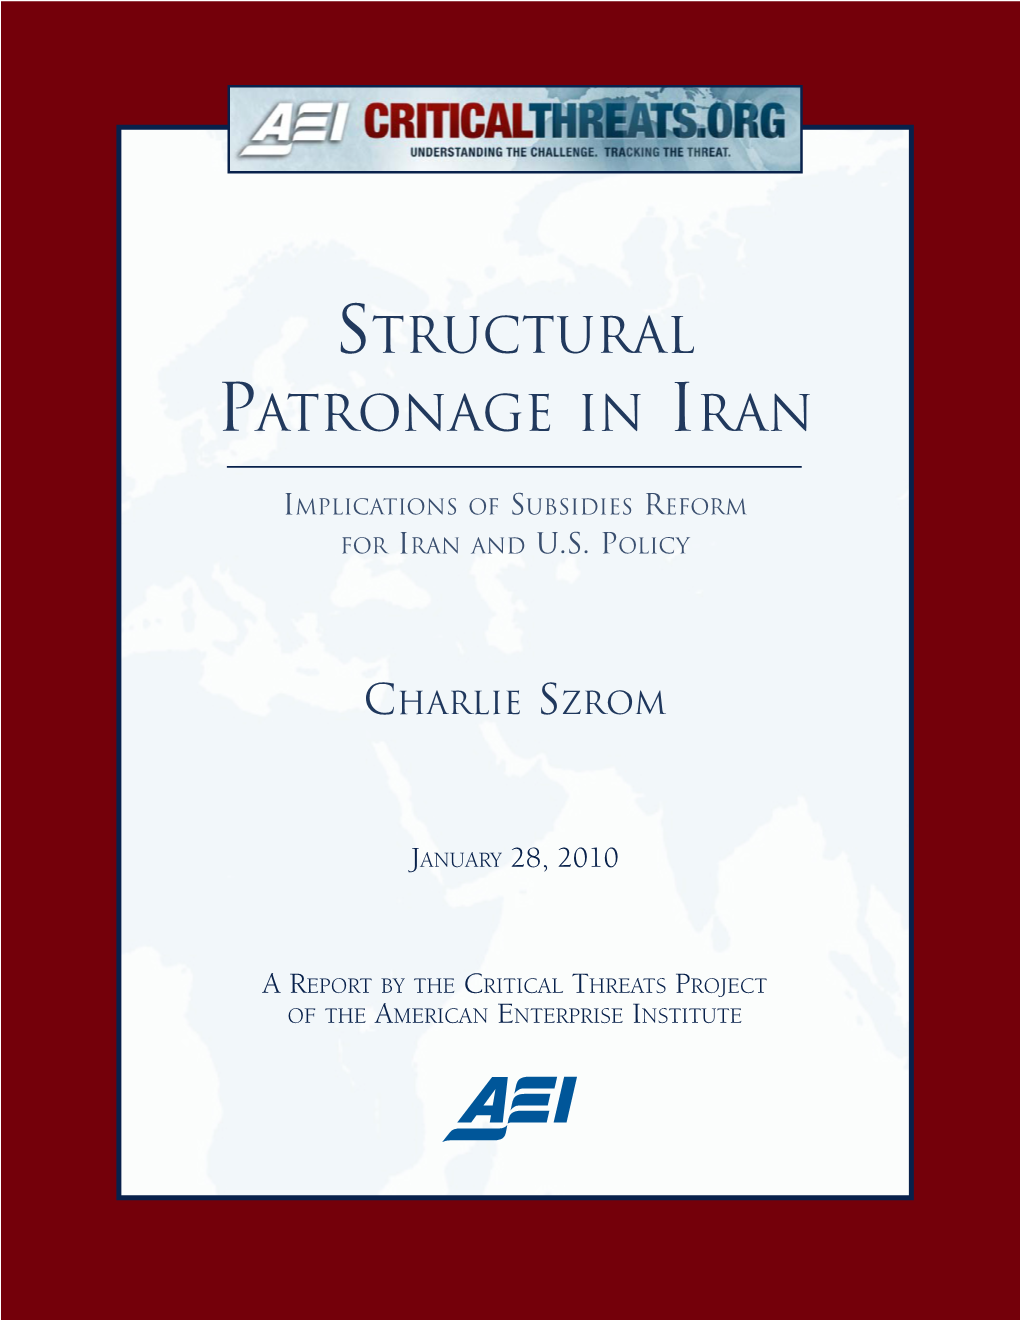 Structural Patronage in Iran: Implications of Subsidies Reform for Iran and U.S